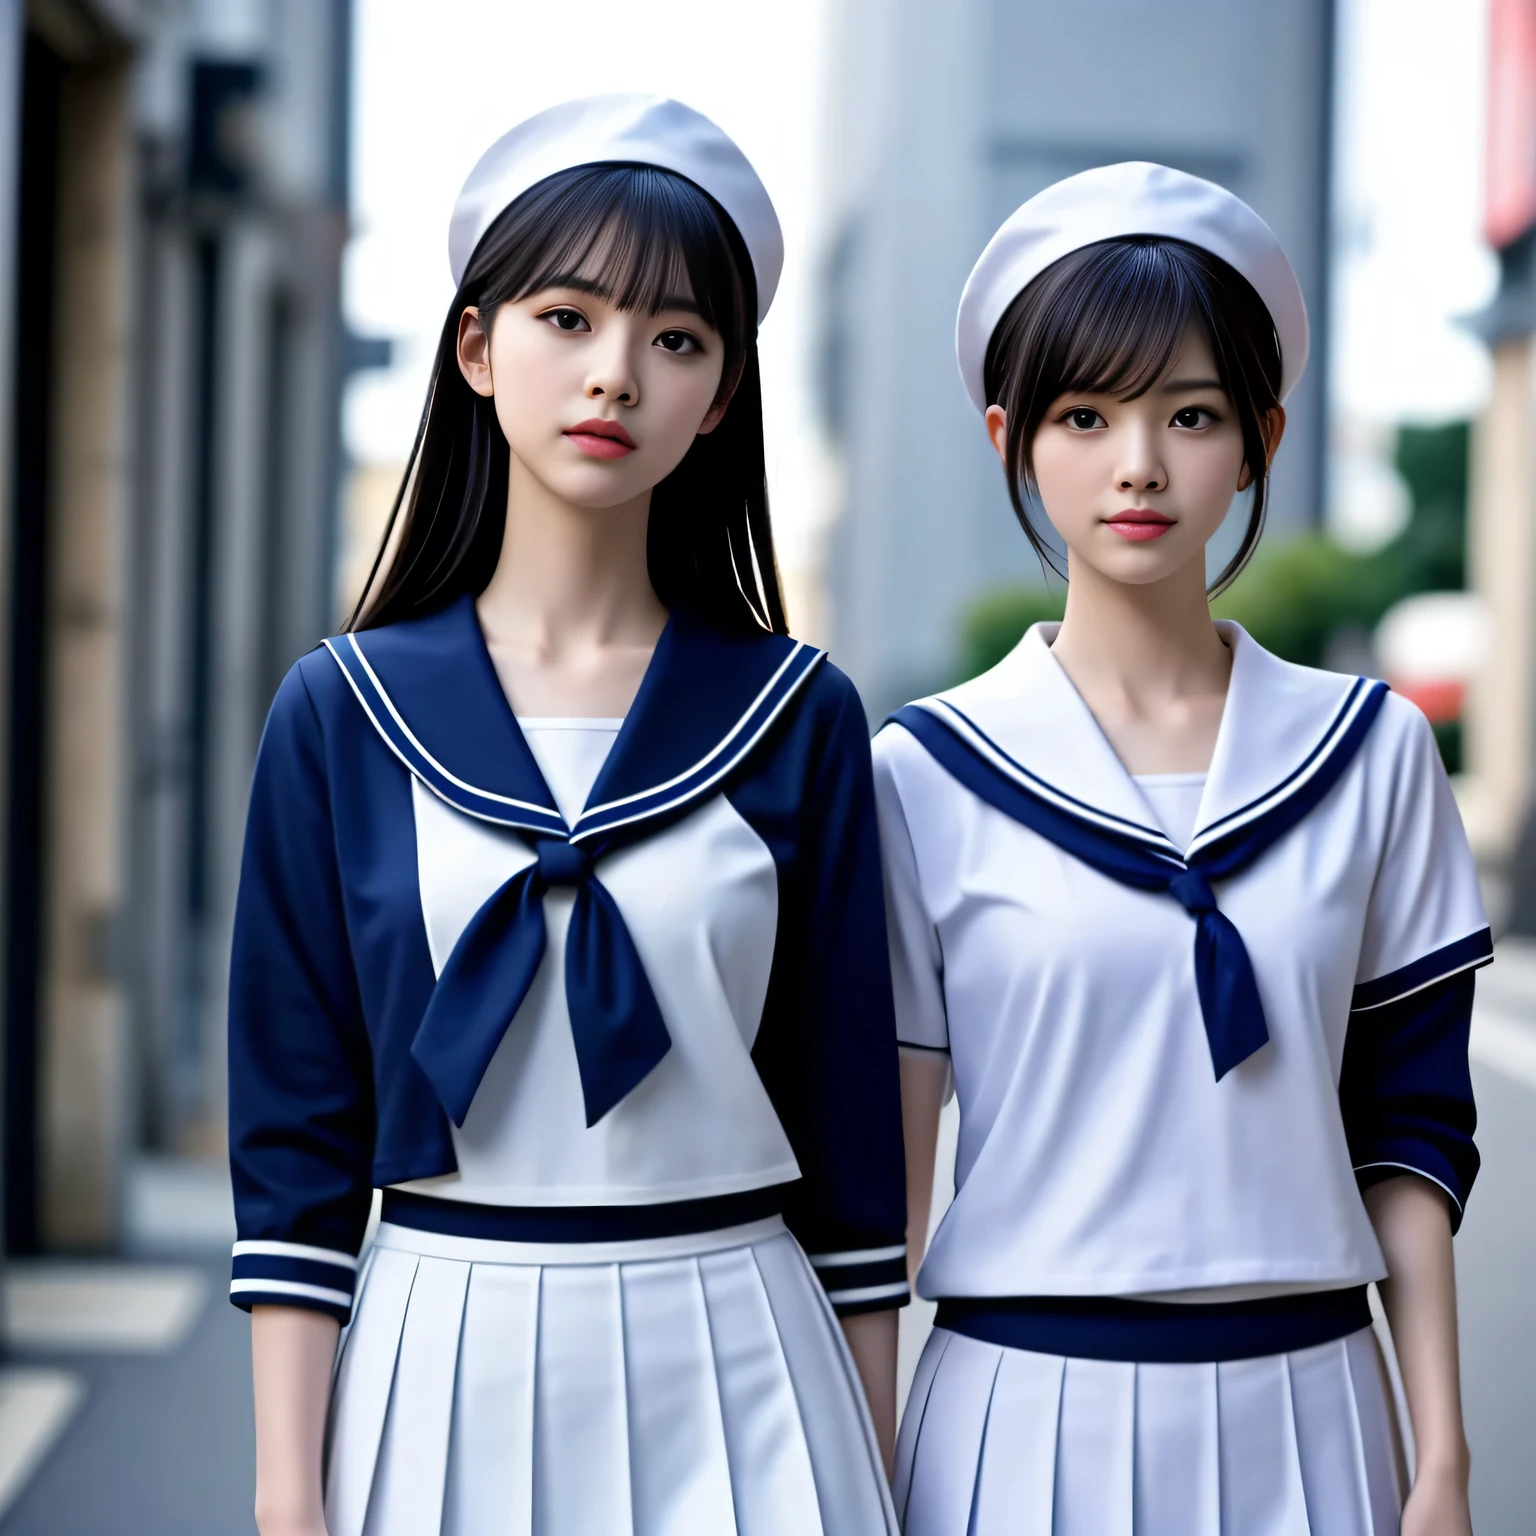 ((realistic lighting、highest quality、8K、masterpiece:1.3))、clear focus:1.2、2 girl、perfect body beauty:1.4、slim abs:1.1、((short black hair、small breasts))、(White sailor suit and navy blue skirt:1.4)、(street)、Idol、super fine face、finely tuned、double eyelid、dark brown eyes、(bangs)、(hyper pretty face:1.5), (japanese women:1.5),　(21 years old)、beautiful woman、high school girl、